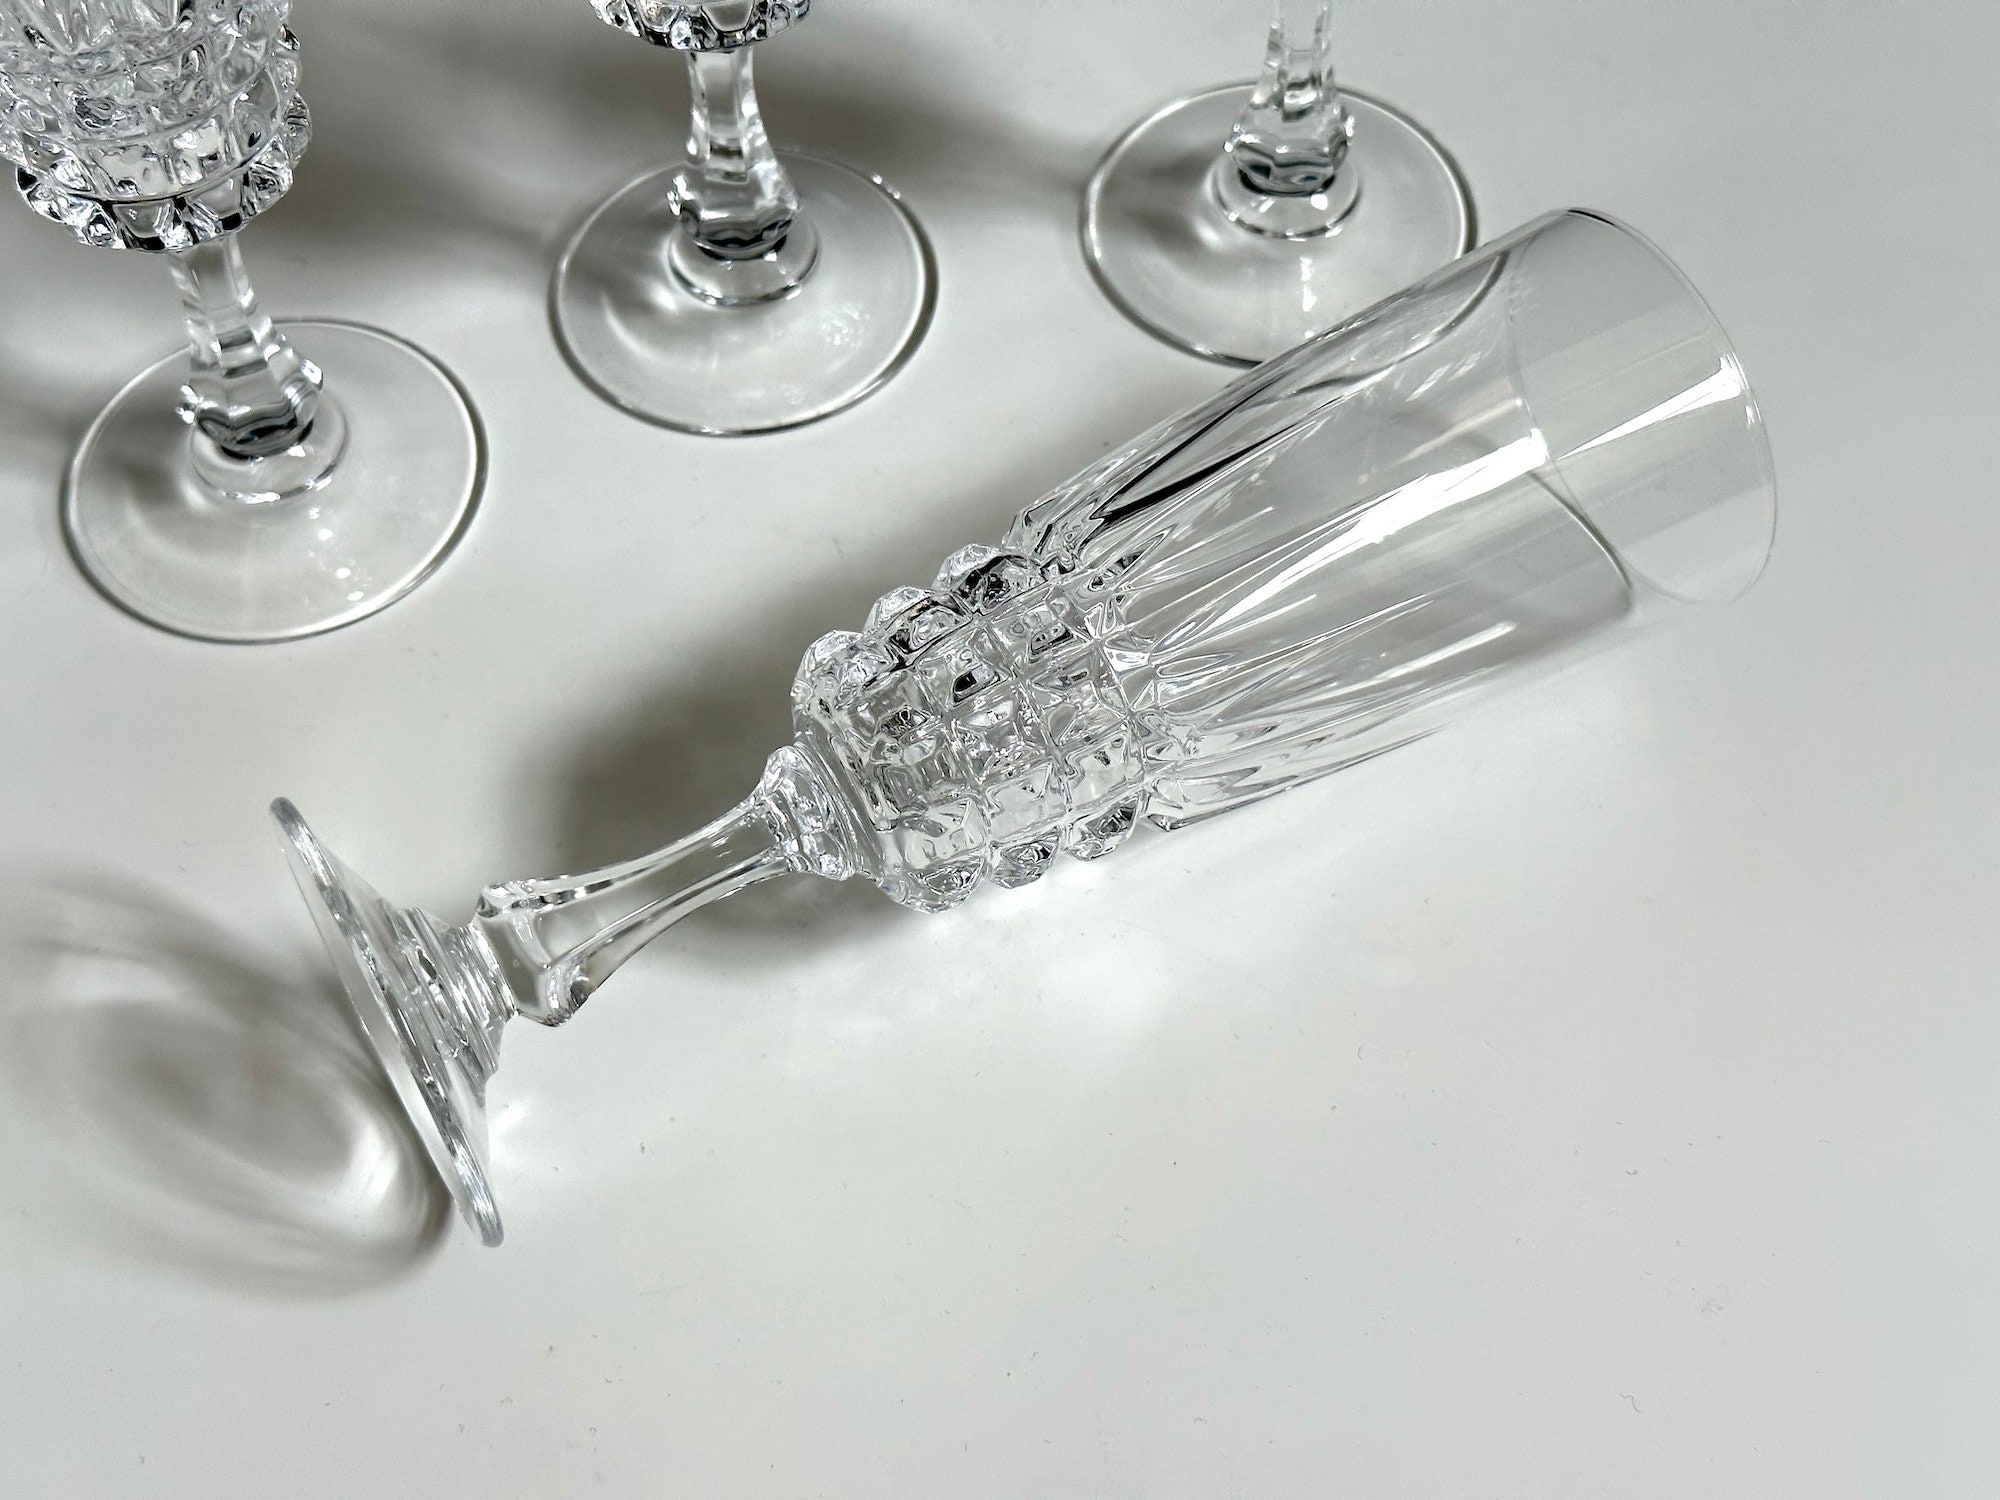 Coupe d'État: The Rise and Fall of the Champagne Flute - PUNCH